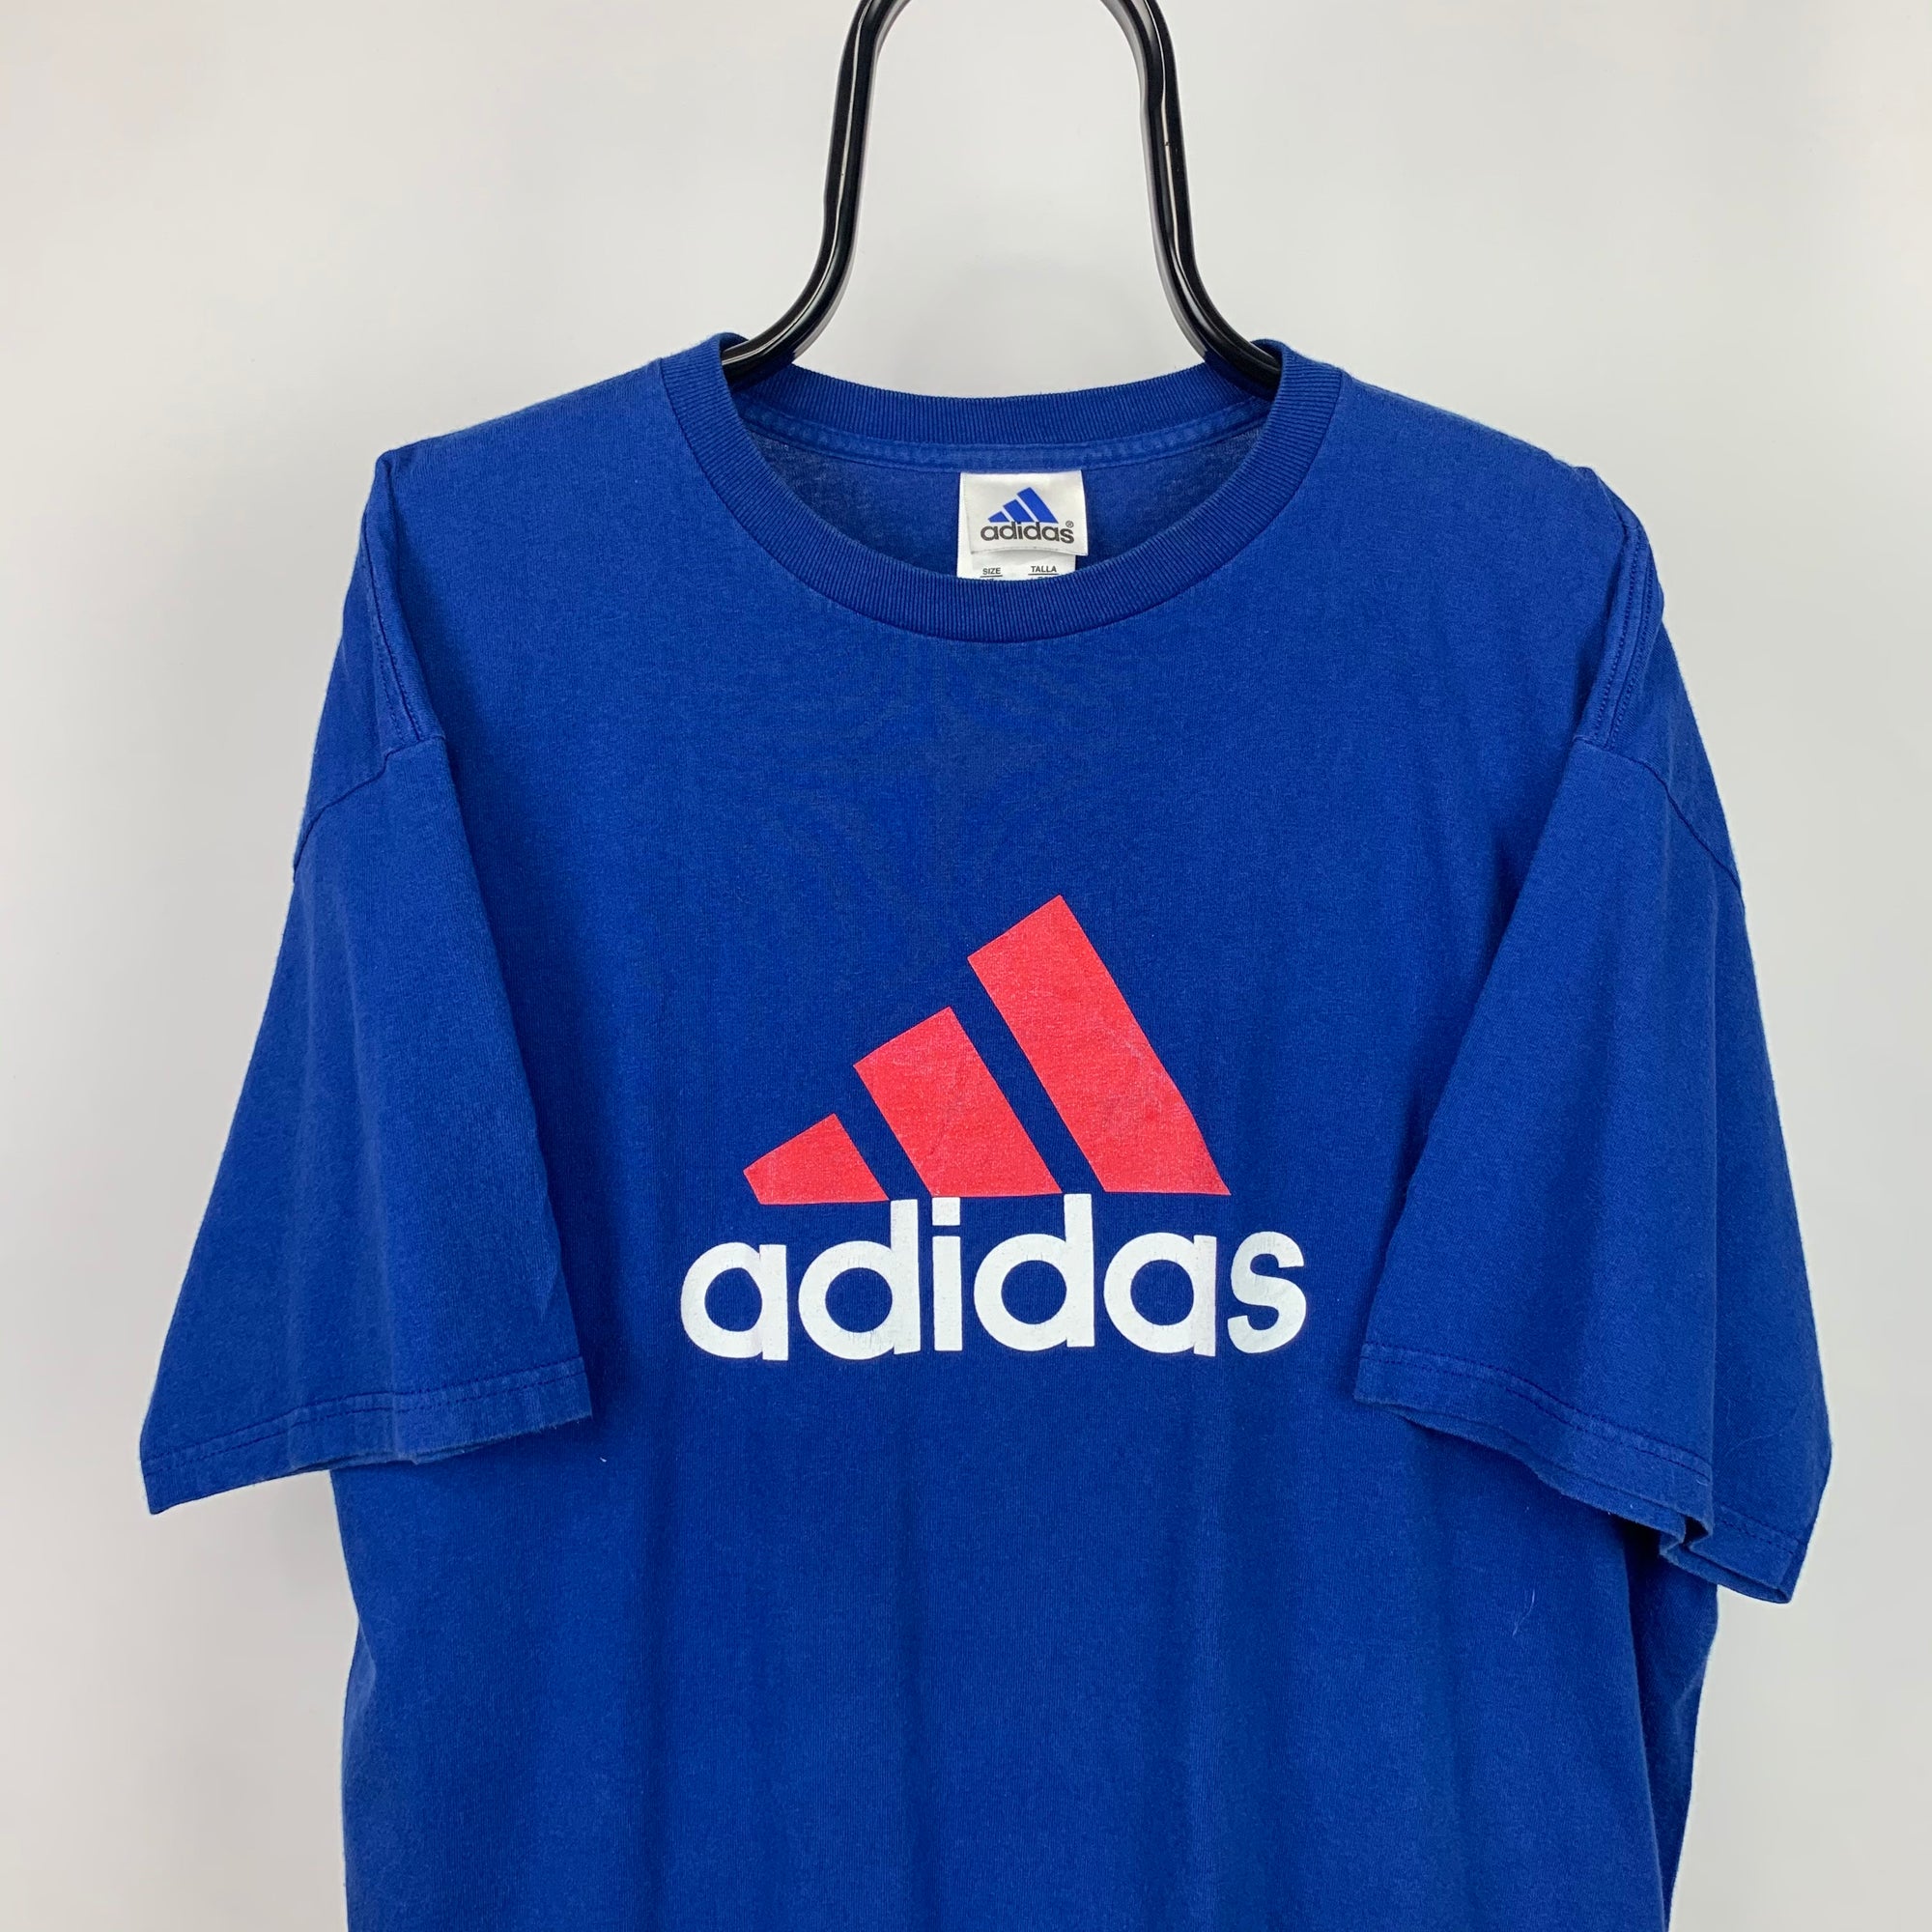 Vintage Adidas Spellout Tee in Blue/Red - Men's Large/Women's XL